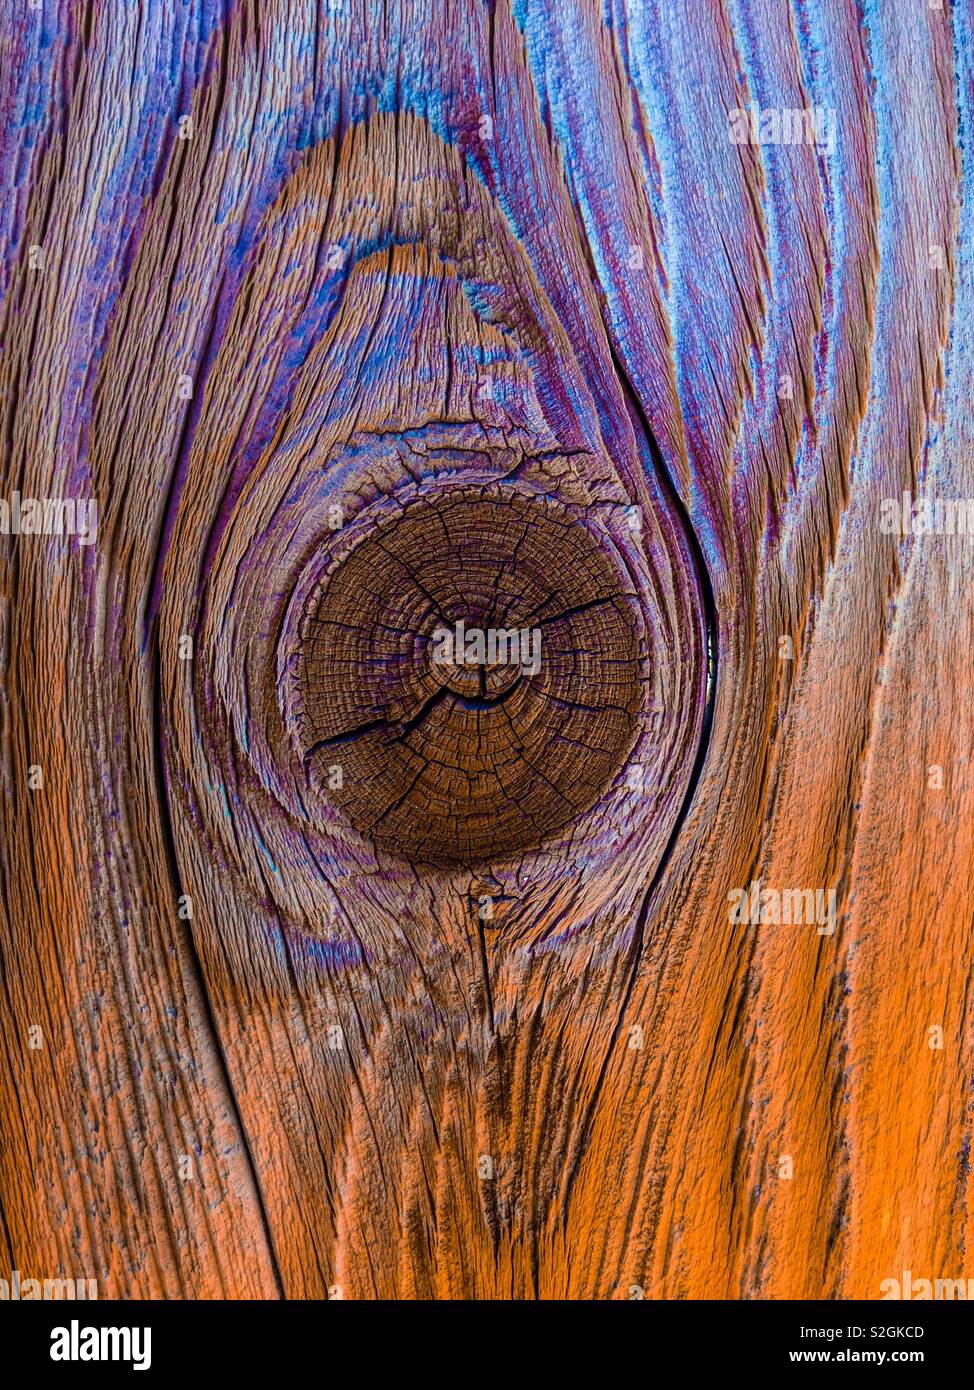 Stained wood with knot in center. Stock Photo